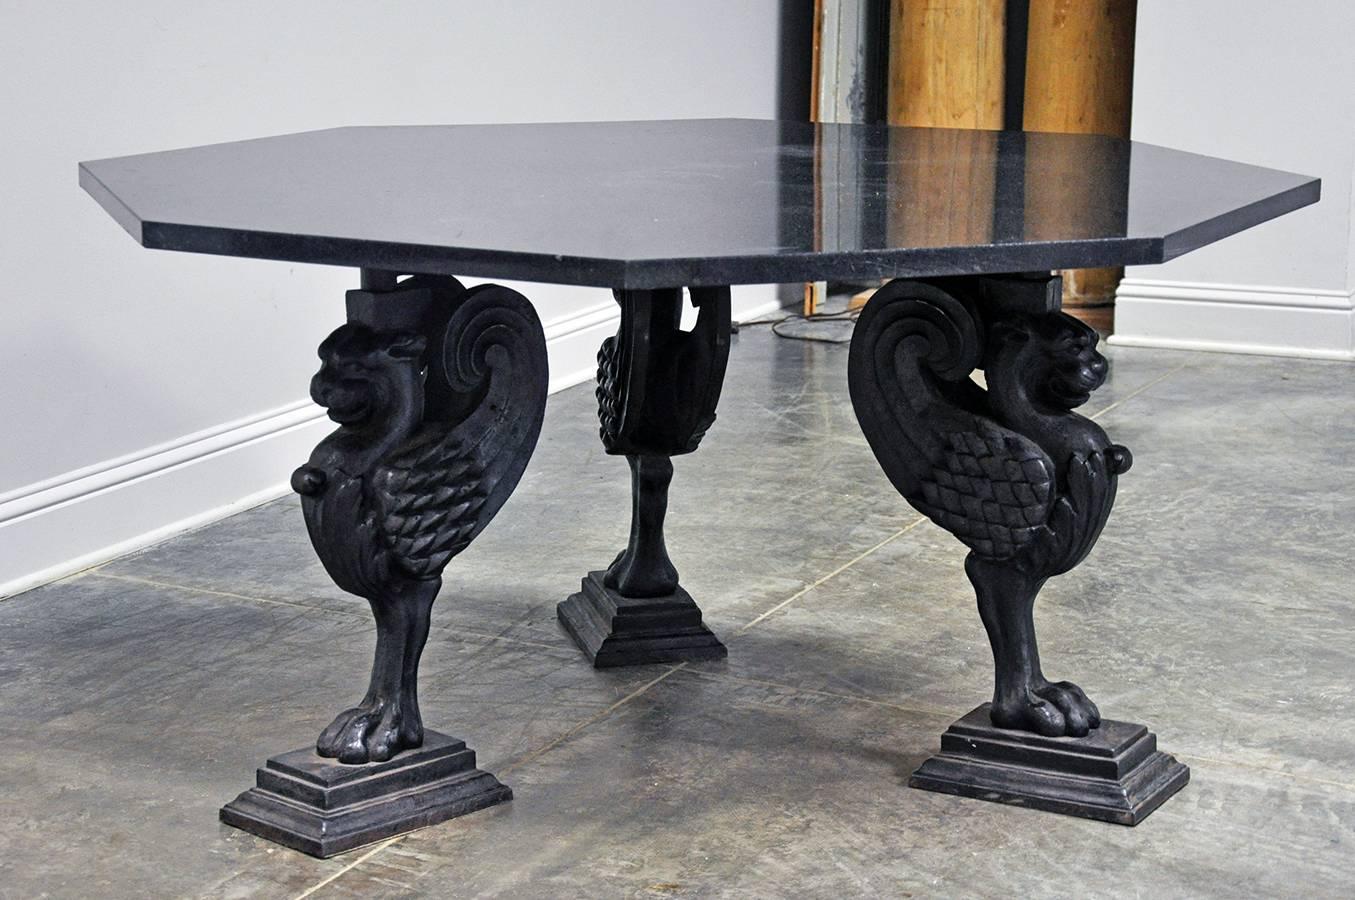 20th century French octagonal table in black granite atop three cast iron griffin legs. Would make for a stunning entry or game table. 

Established in 1979, Joyce Horn Antiques, ltd. continues its 38 year tradition of being a family owned and